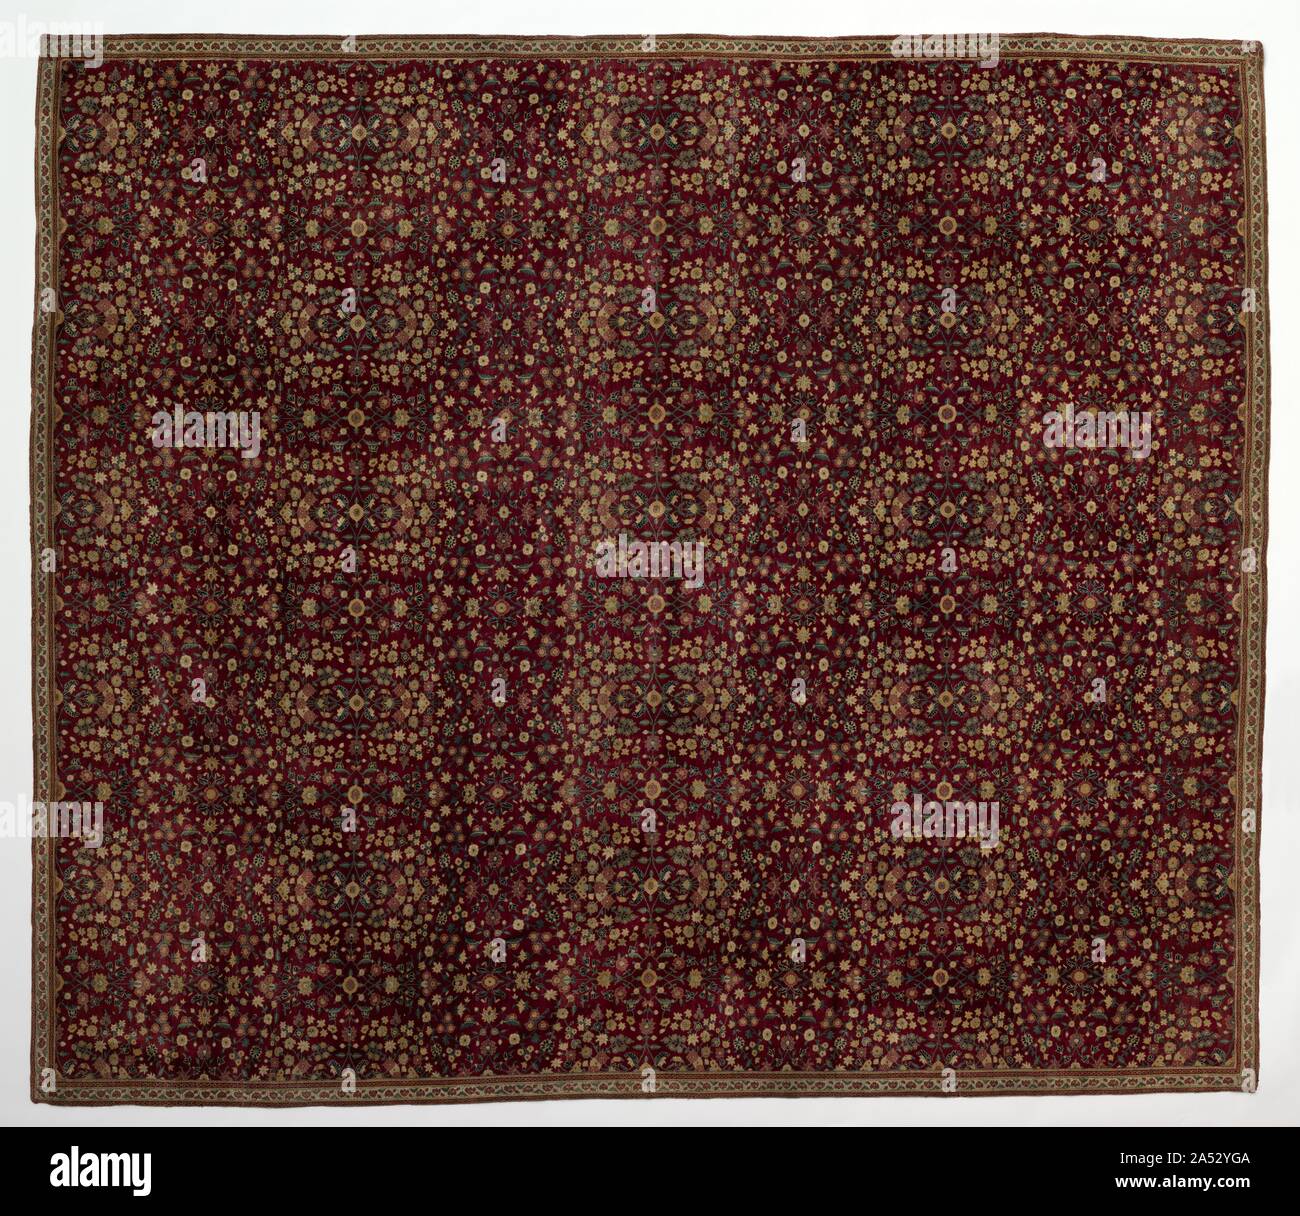 Woolen carpet with millefleurs decoration, early 1600s. This tour de force of Mughal weaving sets symmetrically intertwined flowering vines against a deep wine-red ground. The small-scale flowers that fill the ground space appear to be so numerous that this type of pattern is given the name millefleurs, &quot;thousand flowers&quot; in French, after a type of medieval European tapestry pattern. The use of pashmina wool indicates that this work was made in Kashmir, near the foothills of the Himalayas in northern India. They lend a silken sheen that augments the carpet&#x2019;s luxurious quality. Stock Photo